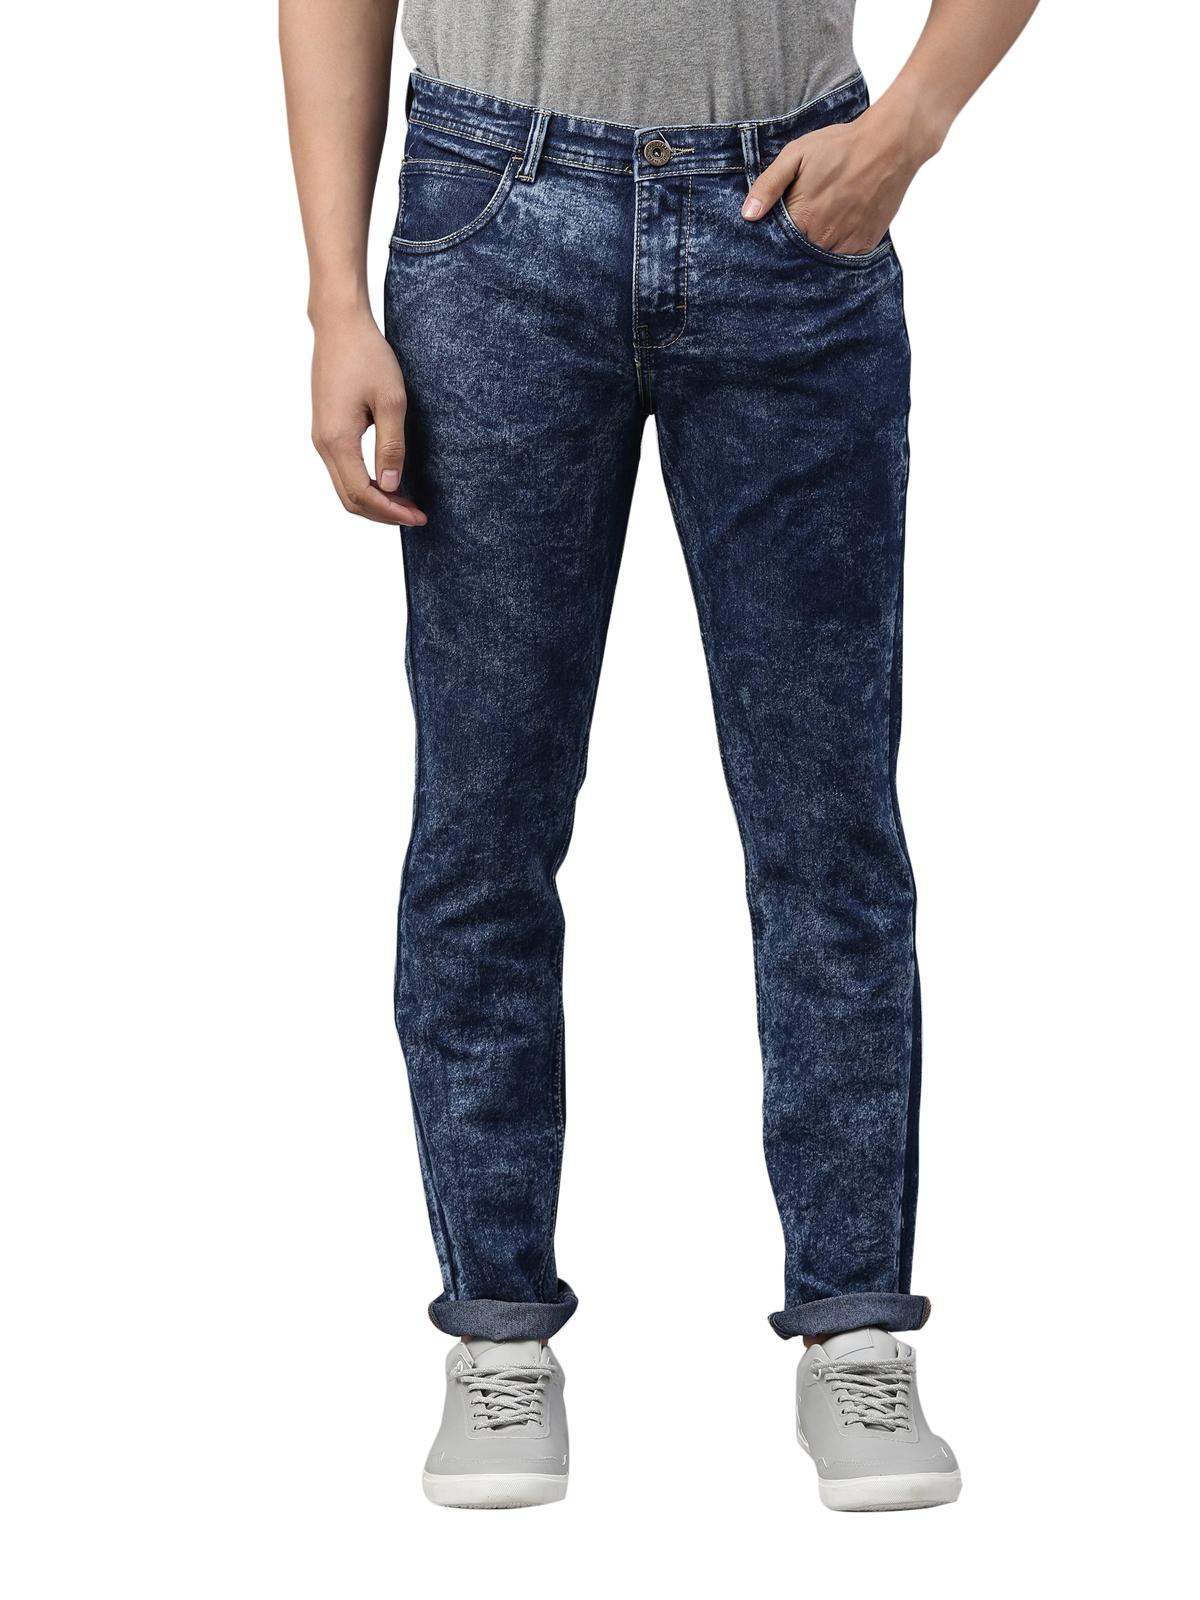 Chennis | Chennis Mens Casual Jeans